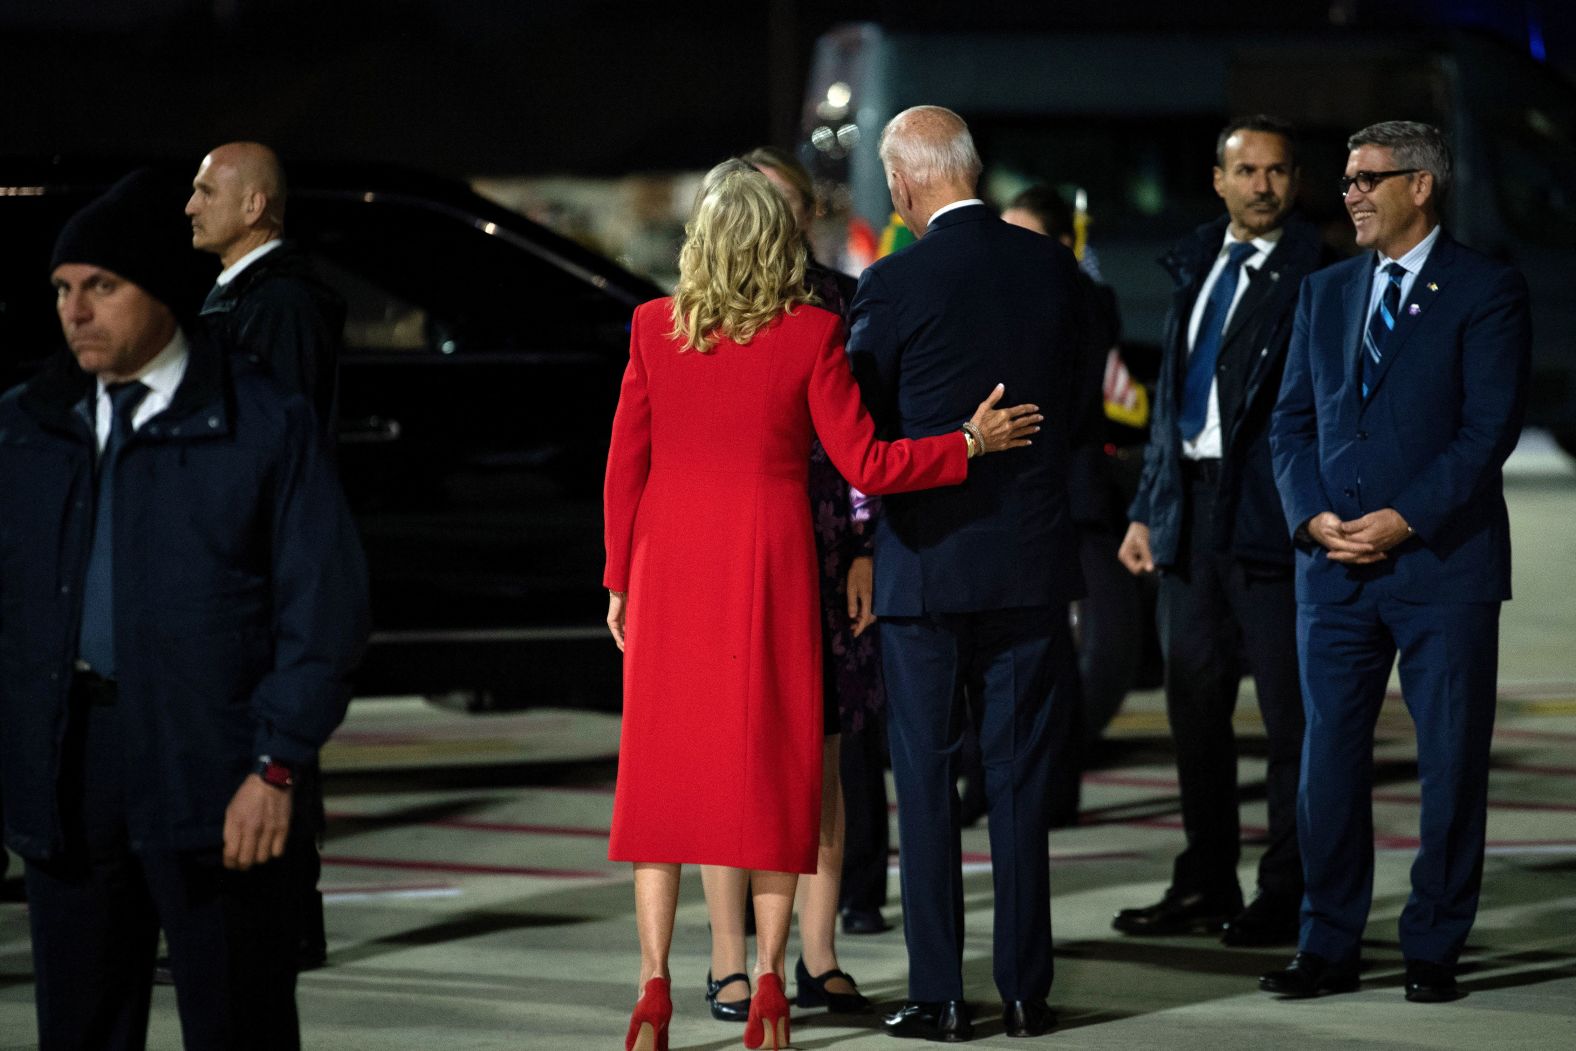 The Bidens are greeted Friday by officials upon their arrival at the Rome-Fiumicino International Airport.